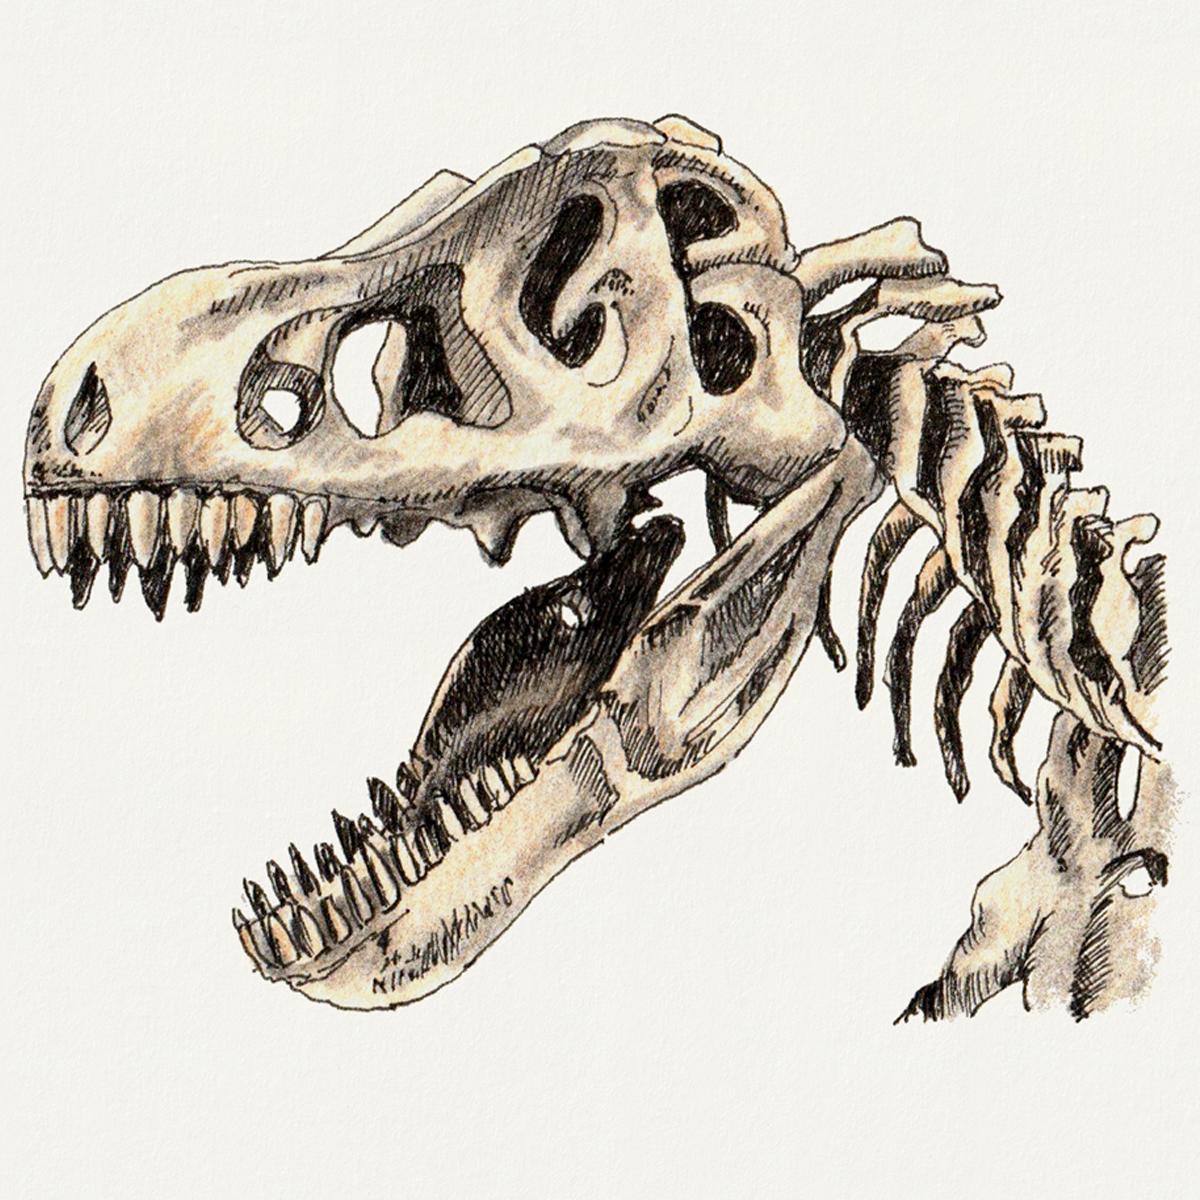 Limited edition print from pen & ink and coloured pencil drawing of a T Rex